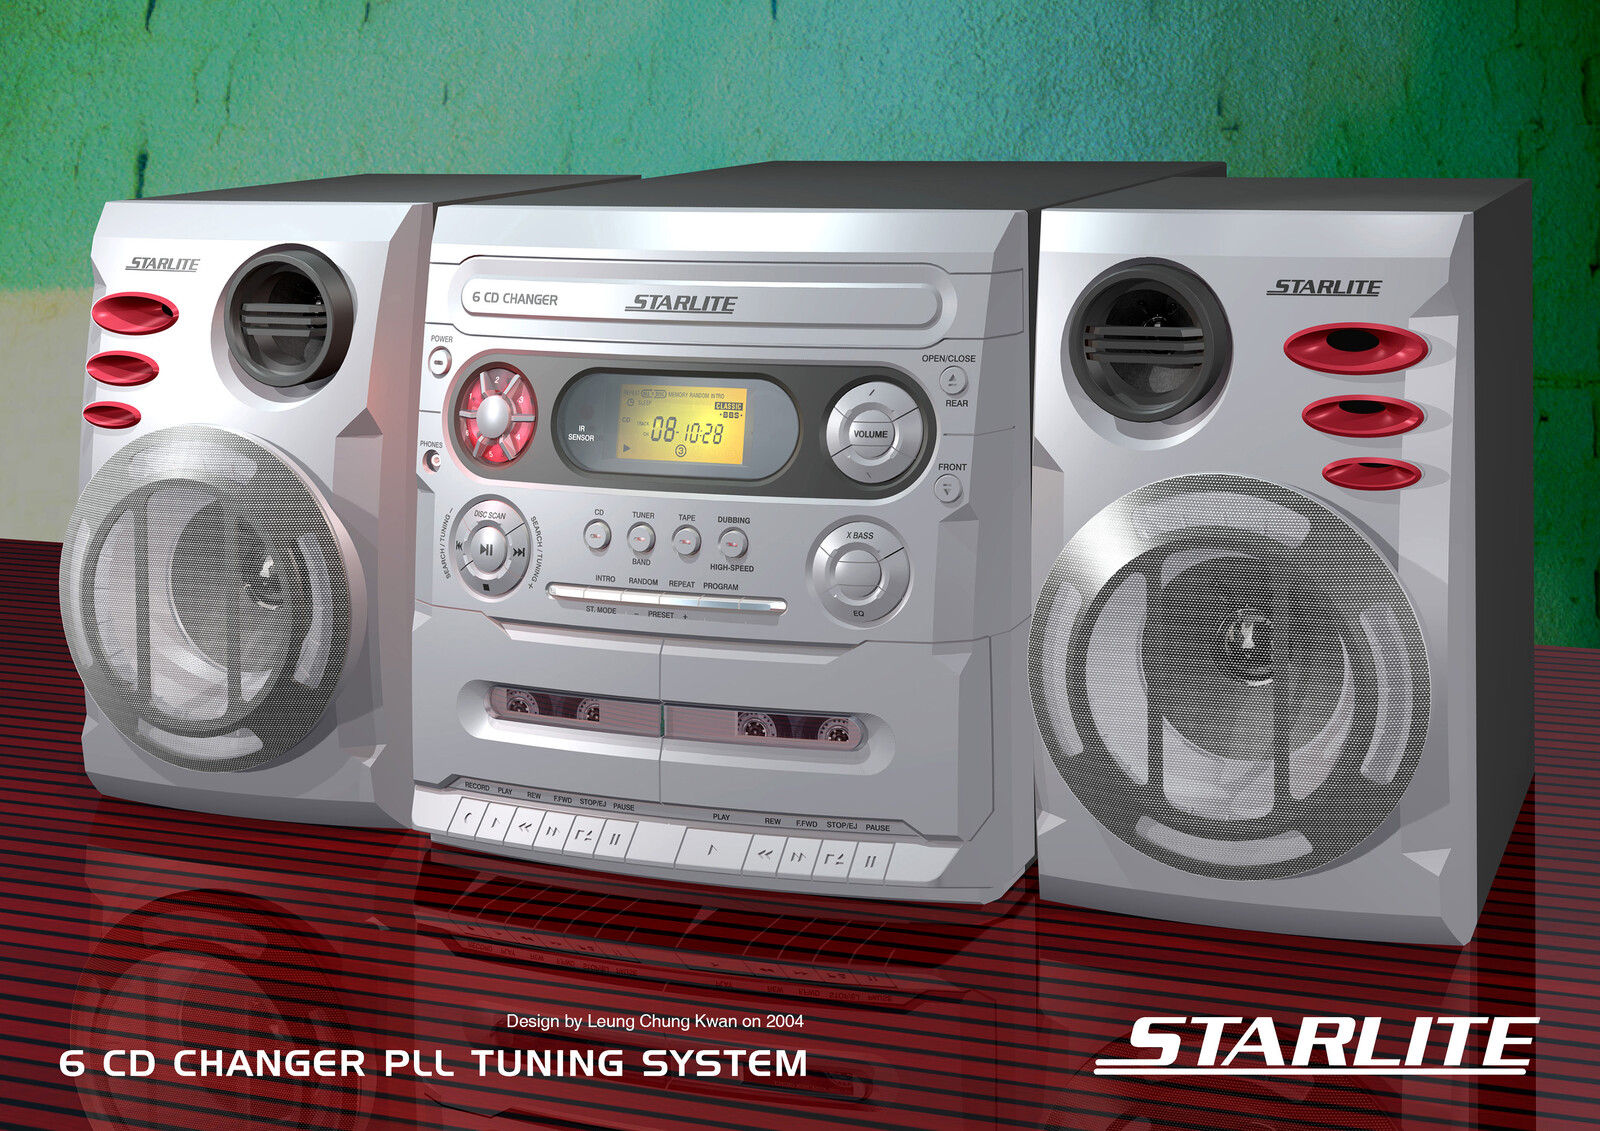 💎 6 CD Changer PLL Tuner with Double Cassette Hi-Fi | Design by Leung Chung Kwan on 2004 💎
Brand Name︰Starlite | Client︰Star Light Electronics Co., LTD.
Other Views︰http://bit.ly/sl02c-6cd-pll-double